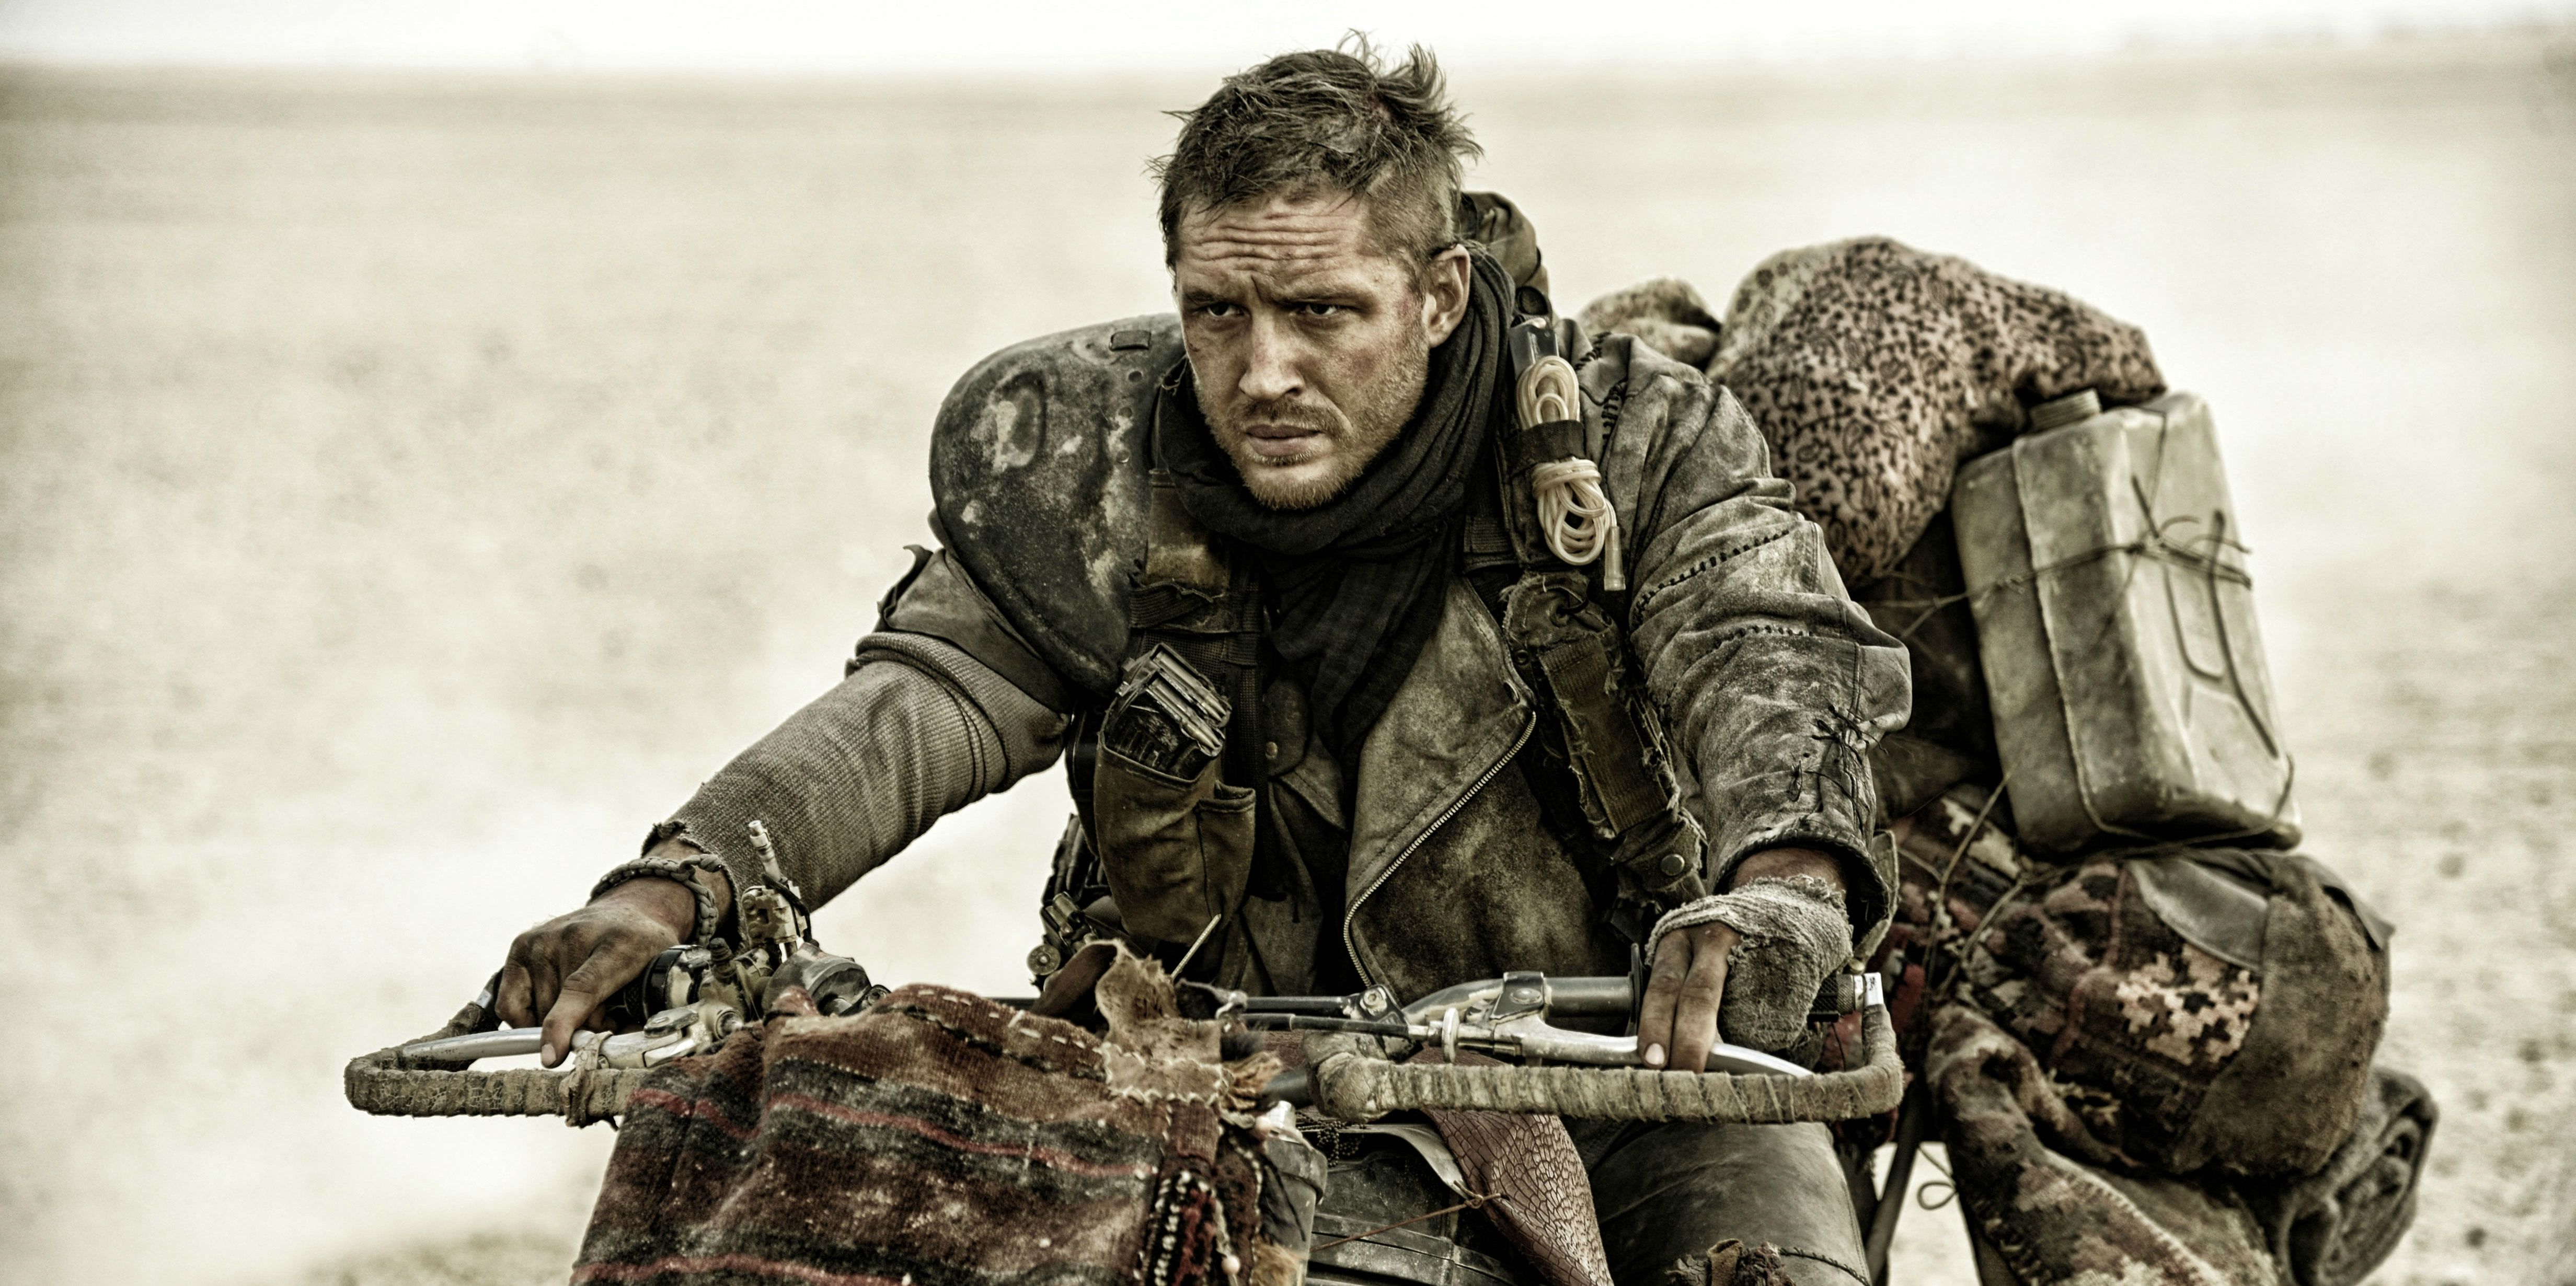 Mad Max: Fury Road - In the first film of the Mad Max series in 30 years, original director and creator George Miller brings it back with Tom Hardy in the lead role. Max, now alone in a post-apocalyptic wasteland, meets Furiosa Charlize Theron and helps her across the dangerous desert. Release date: May 15th